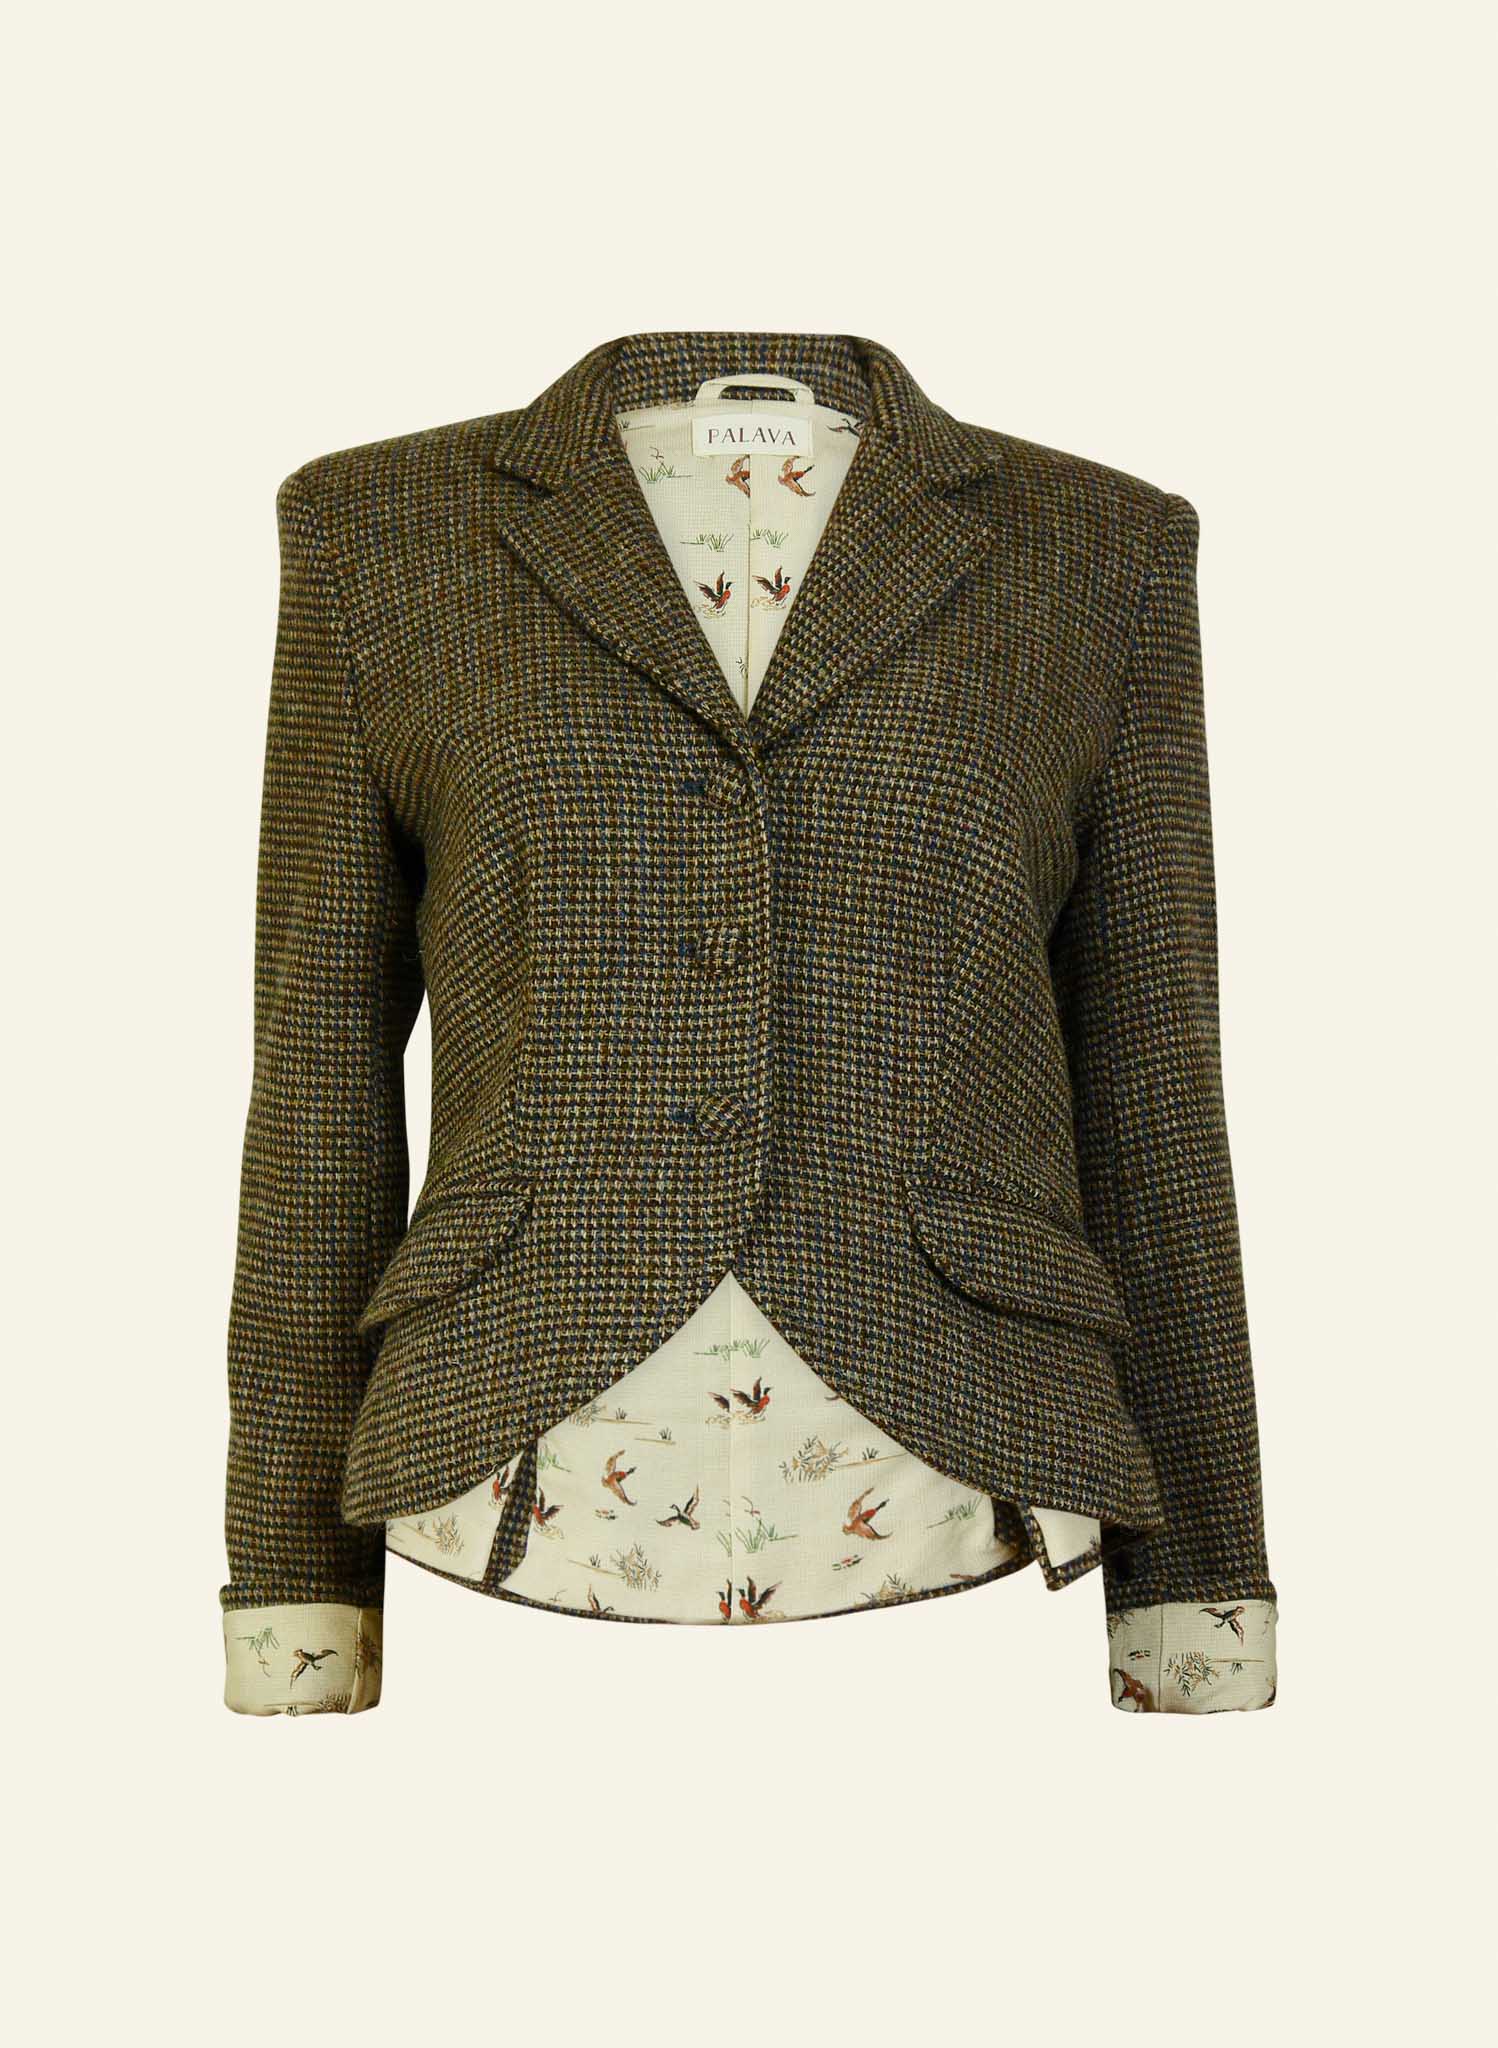 How to Wear Women's Tweed Clothes - Sumissura